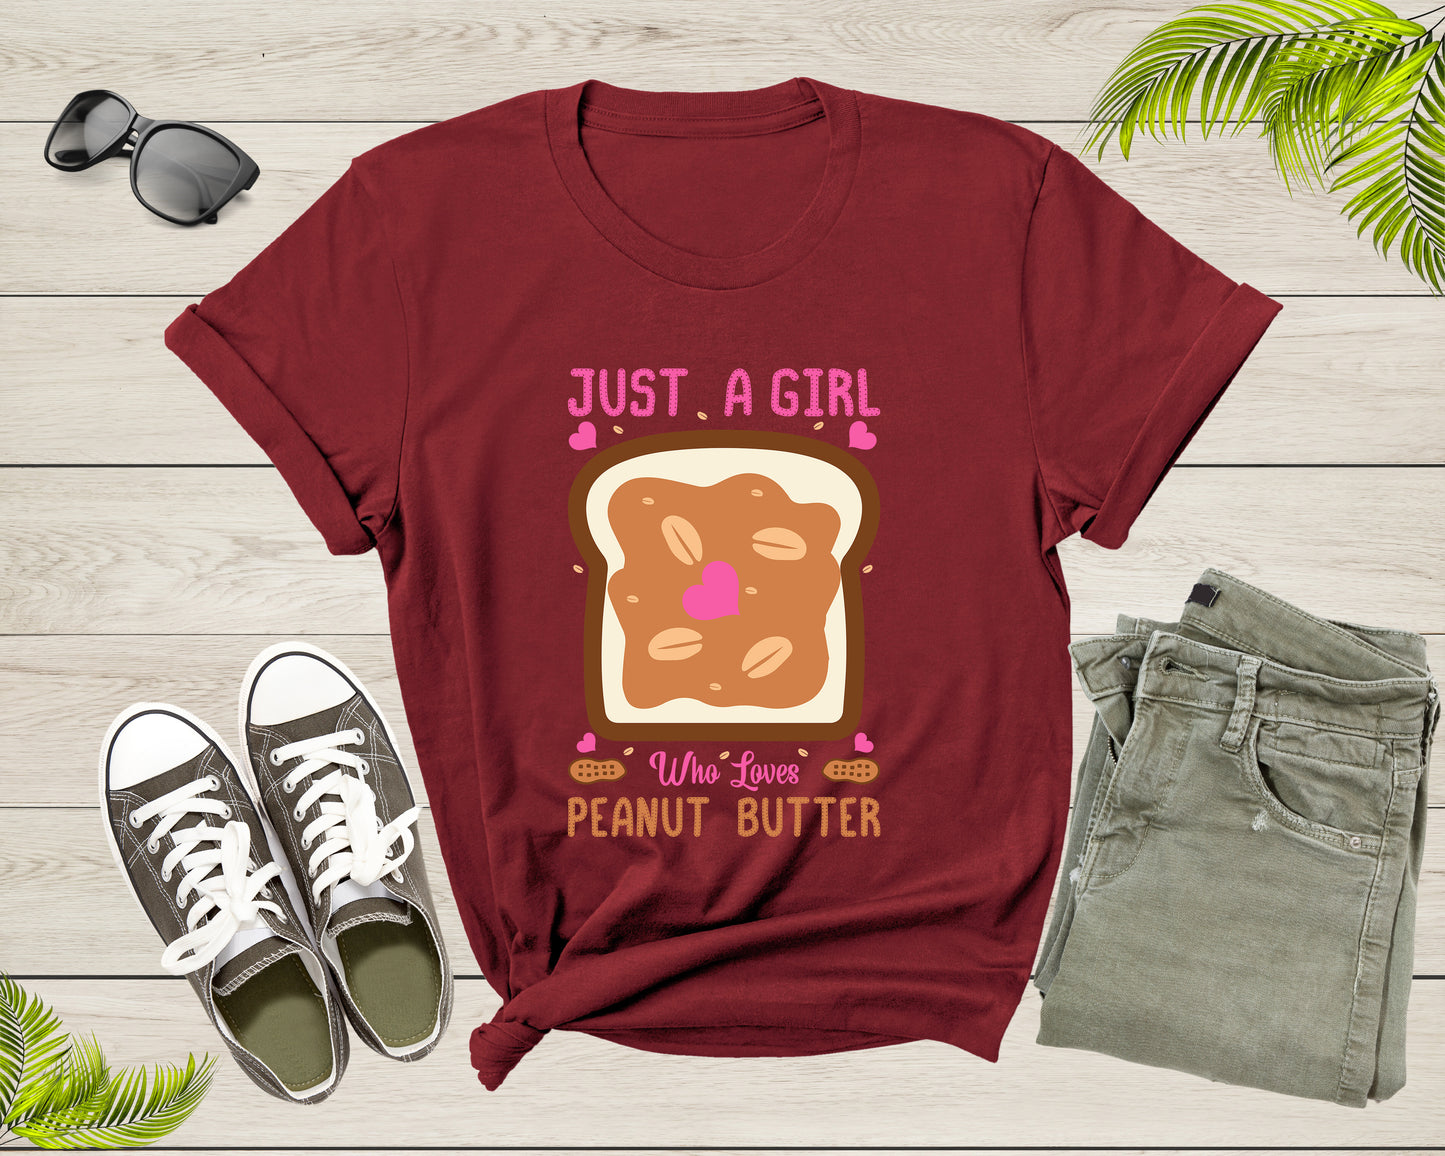 Just A Girl Who Loves Peanut Butter Funny Foodie Lover Gift T-shirt Peanut Butter Jelly Shirt Peanut Butter Lover Tshirt Food Shirt